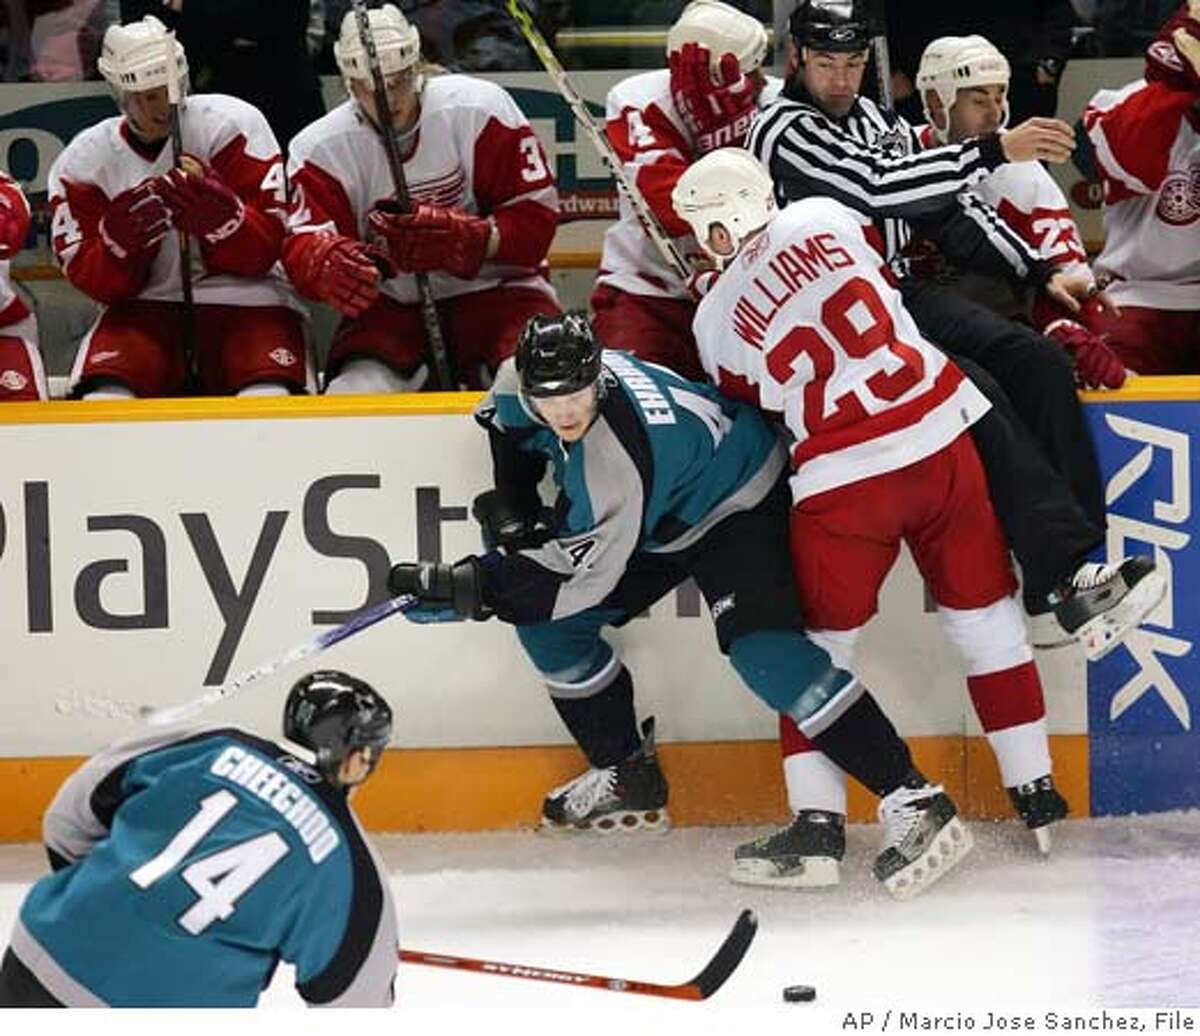 Detroit Red Wings' Jason Williams (29) collides with the San Jose Sharks' Christian Ehrhoff, middle, of Germany, in the first period of an NHL hockey game in San Jose, Calif. on Tuesday, Feb. 28, 2006. (AP Photo/Marcio Jose Sanchez) EFE OUT EFE OUT